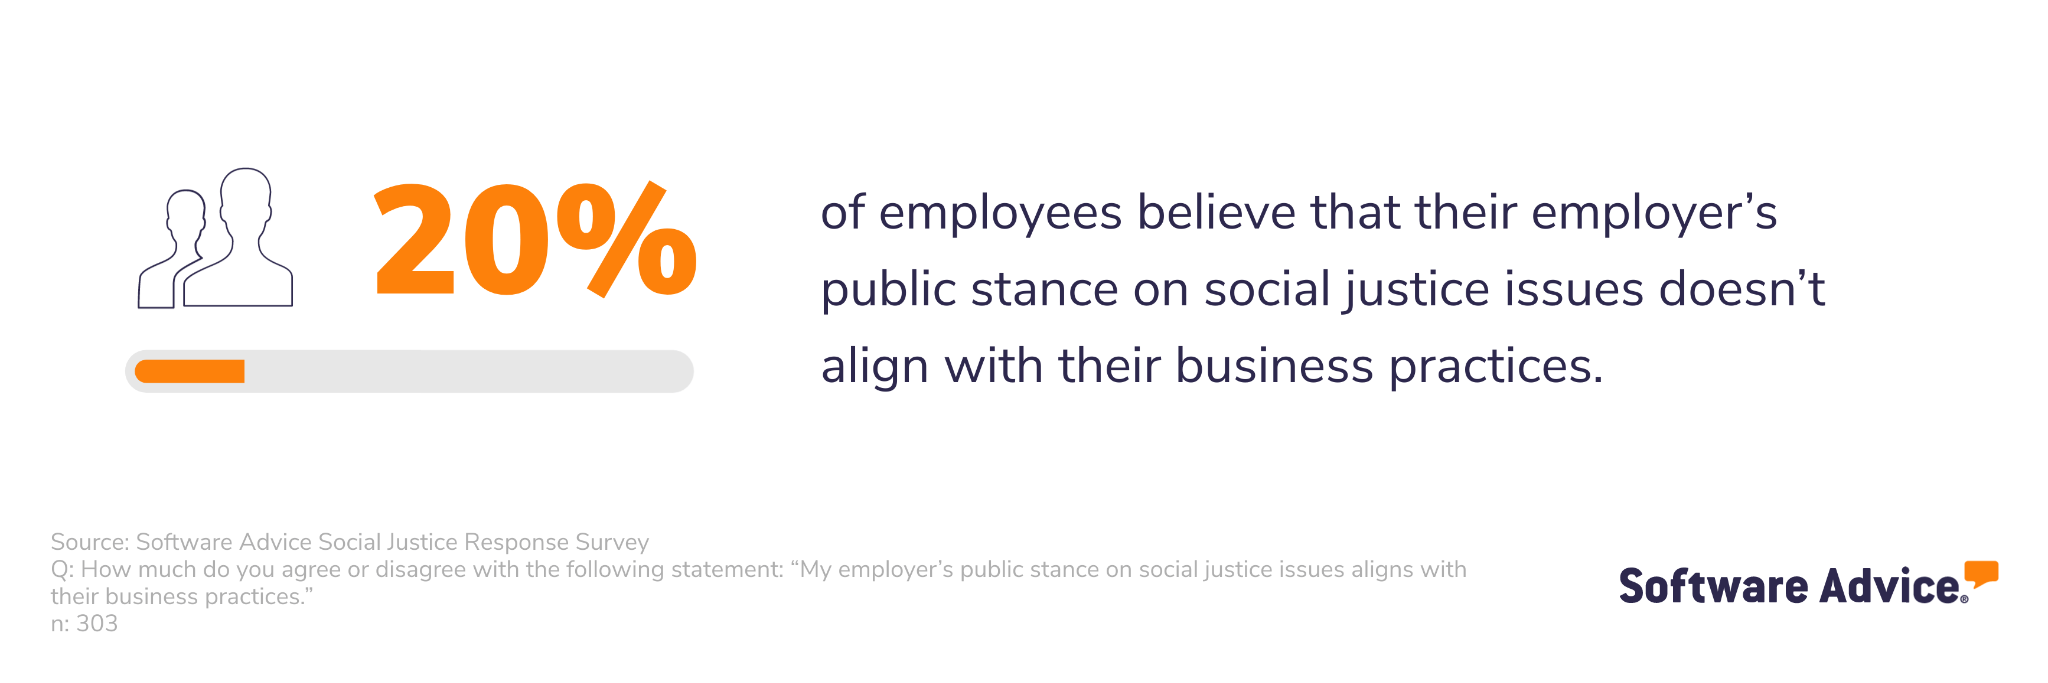 20% of employees believe that their employer's public stance on social justice issues doesn't align with their business practices.